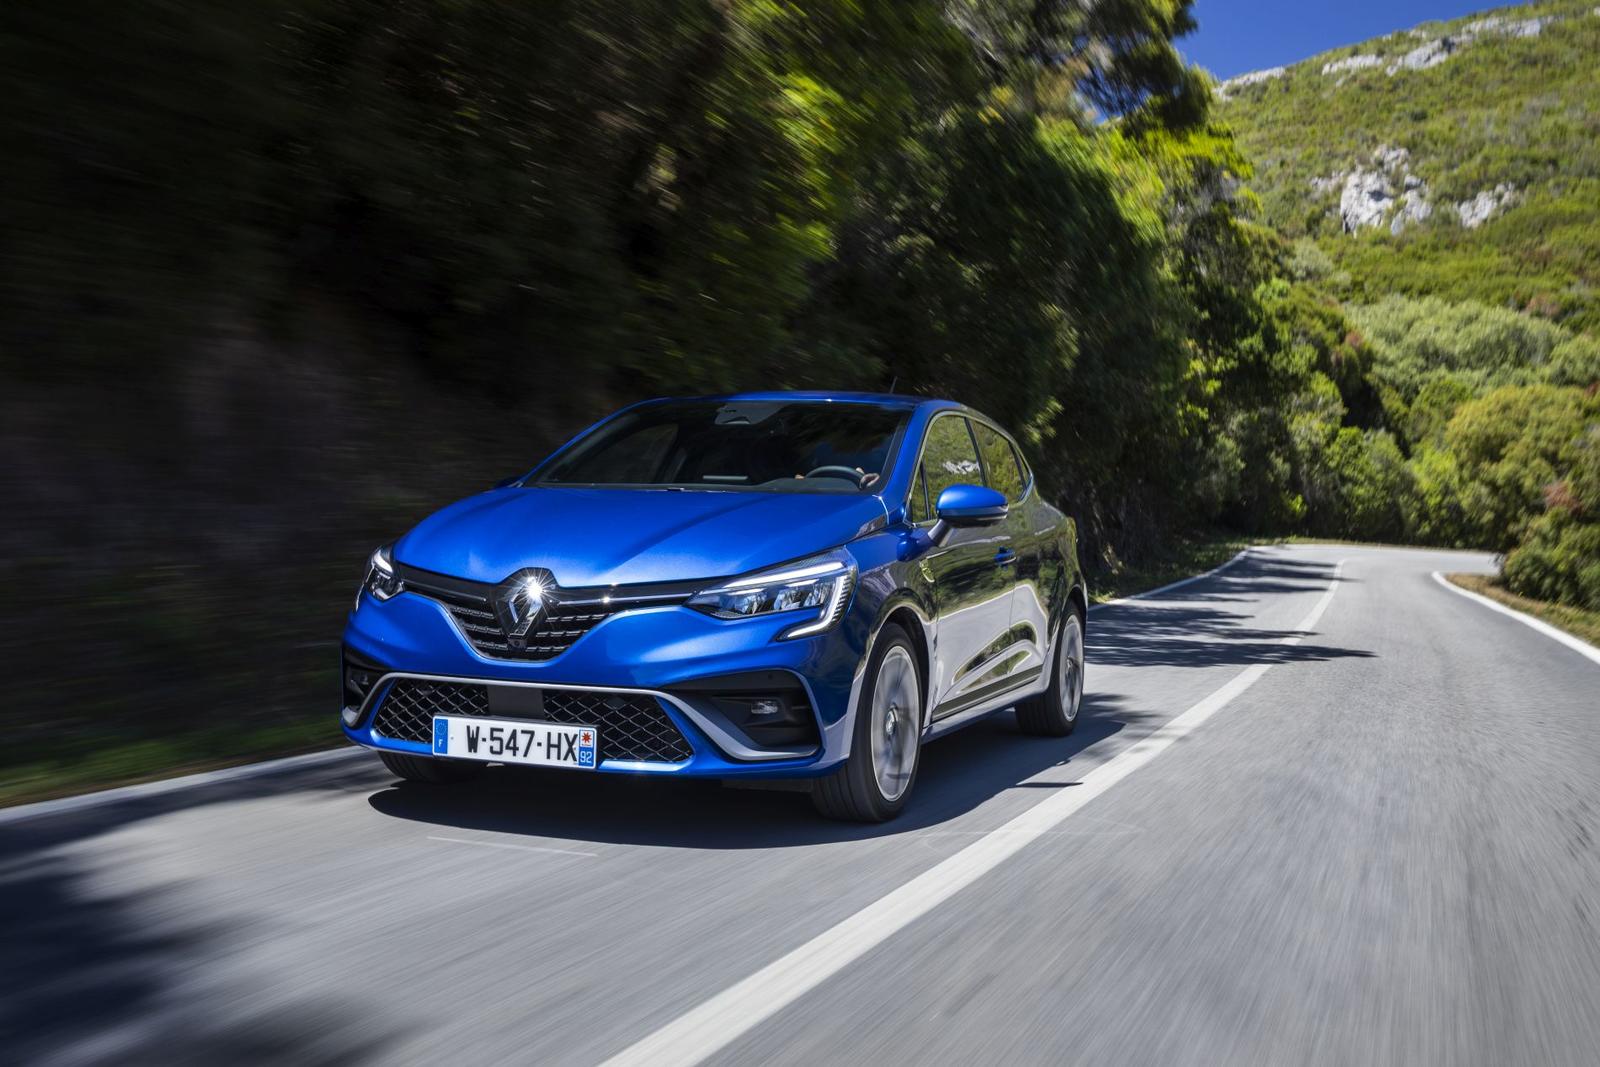 All-new Renault Clio R.S. Line – Blue Iron (8)